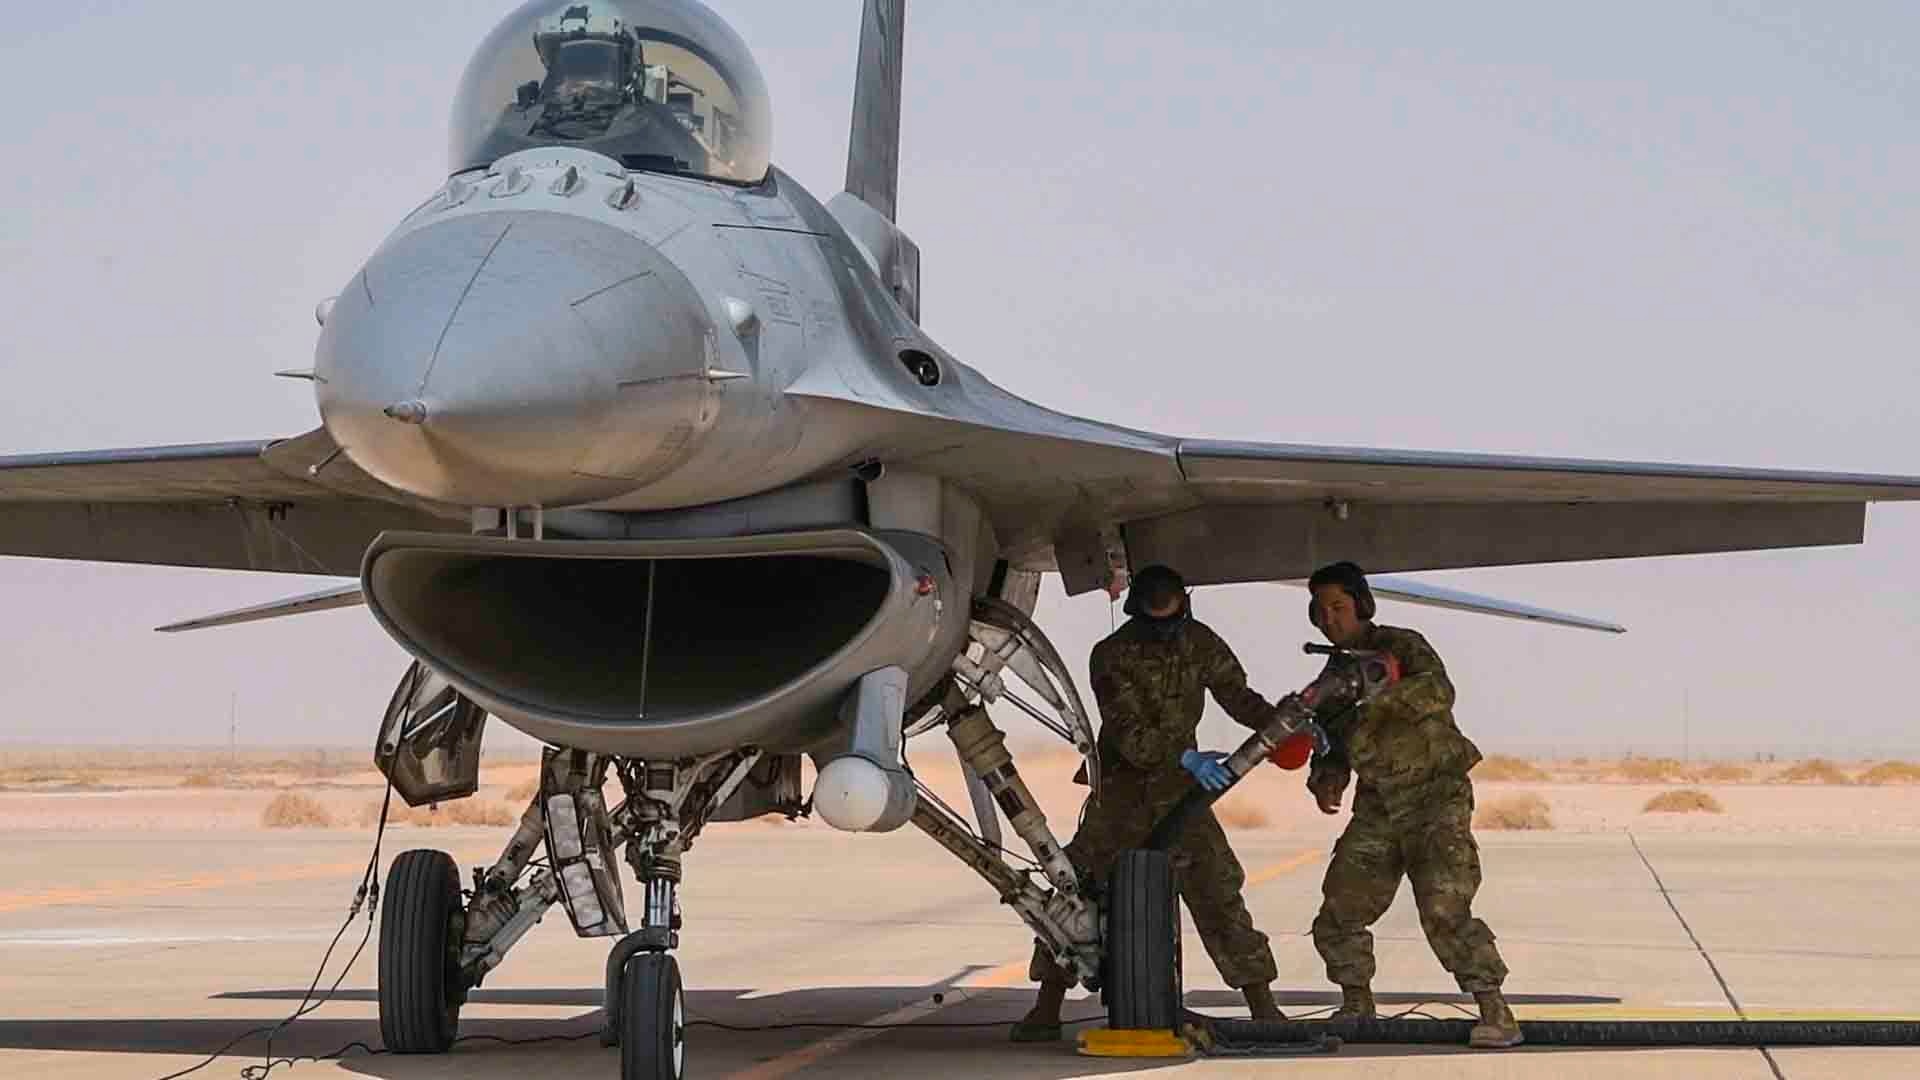 U.S. Airmen from the 380th Expeditionary Aircraft Maintenance Squadron remove a fuel hose from a U.S. Air Force F-16 Fighting Falcon during an engine-running refueling at Prince Sultan Air Base, Kingdom of Saudi Arabia, Feb. 7, 2020. Airmen at PSAB executed hot refueling capabilities by generating easily accessible fuel and rapidly returning the diverse aircraft set to the skies as part of an agile combat employment mission that exercised a critical capability of U.S. Air Forces Central Command. (U.S. Air Force photo by Senior Airman Giovanni Sims)